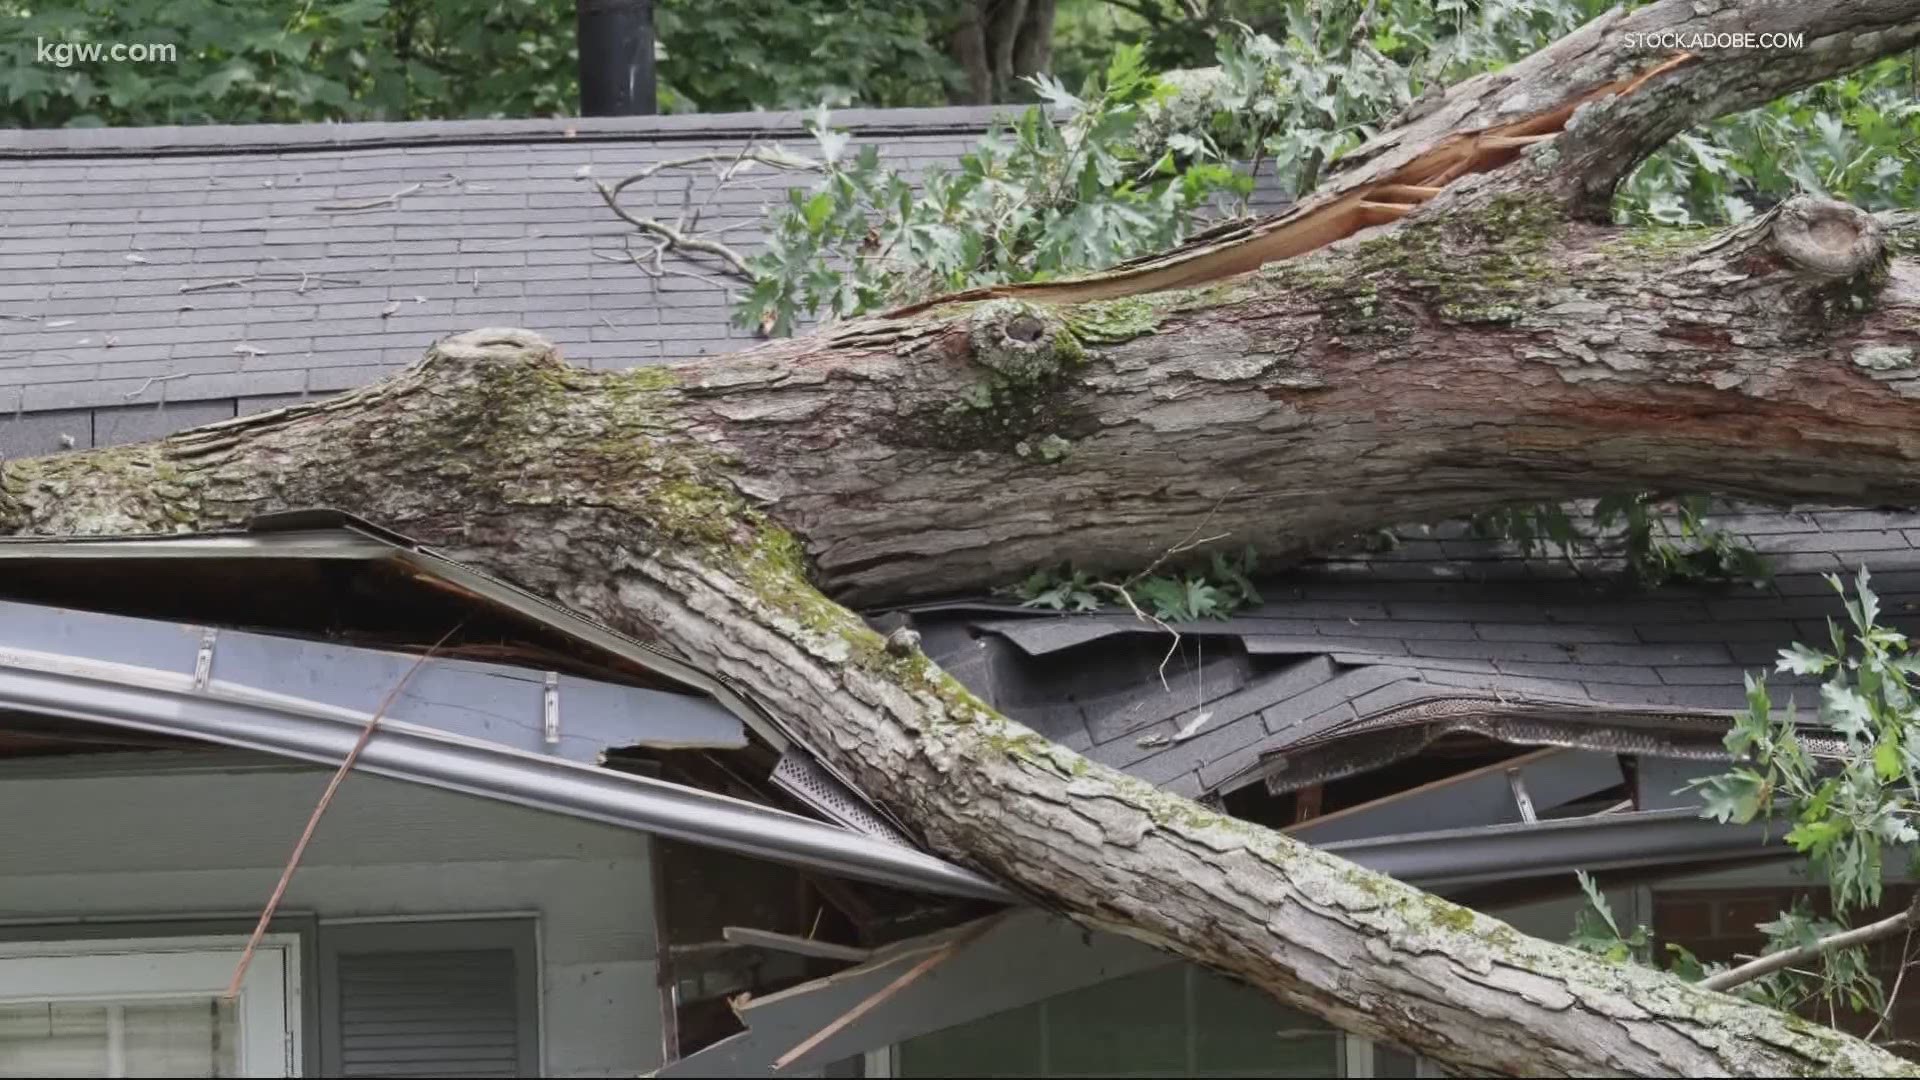 As for damage left behind by the winter storm, a lot of people want to know what insurance covers and what it doesn't. KGW's Galen Ettlin breaks it down.